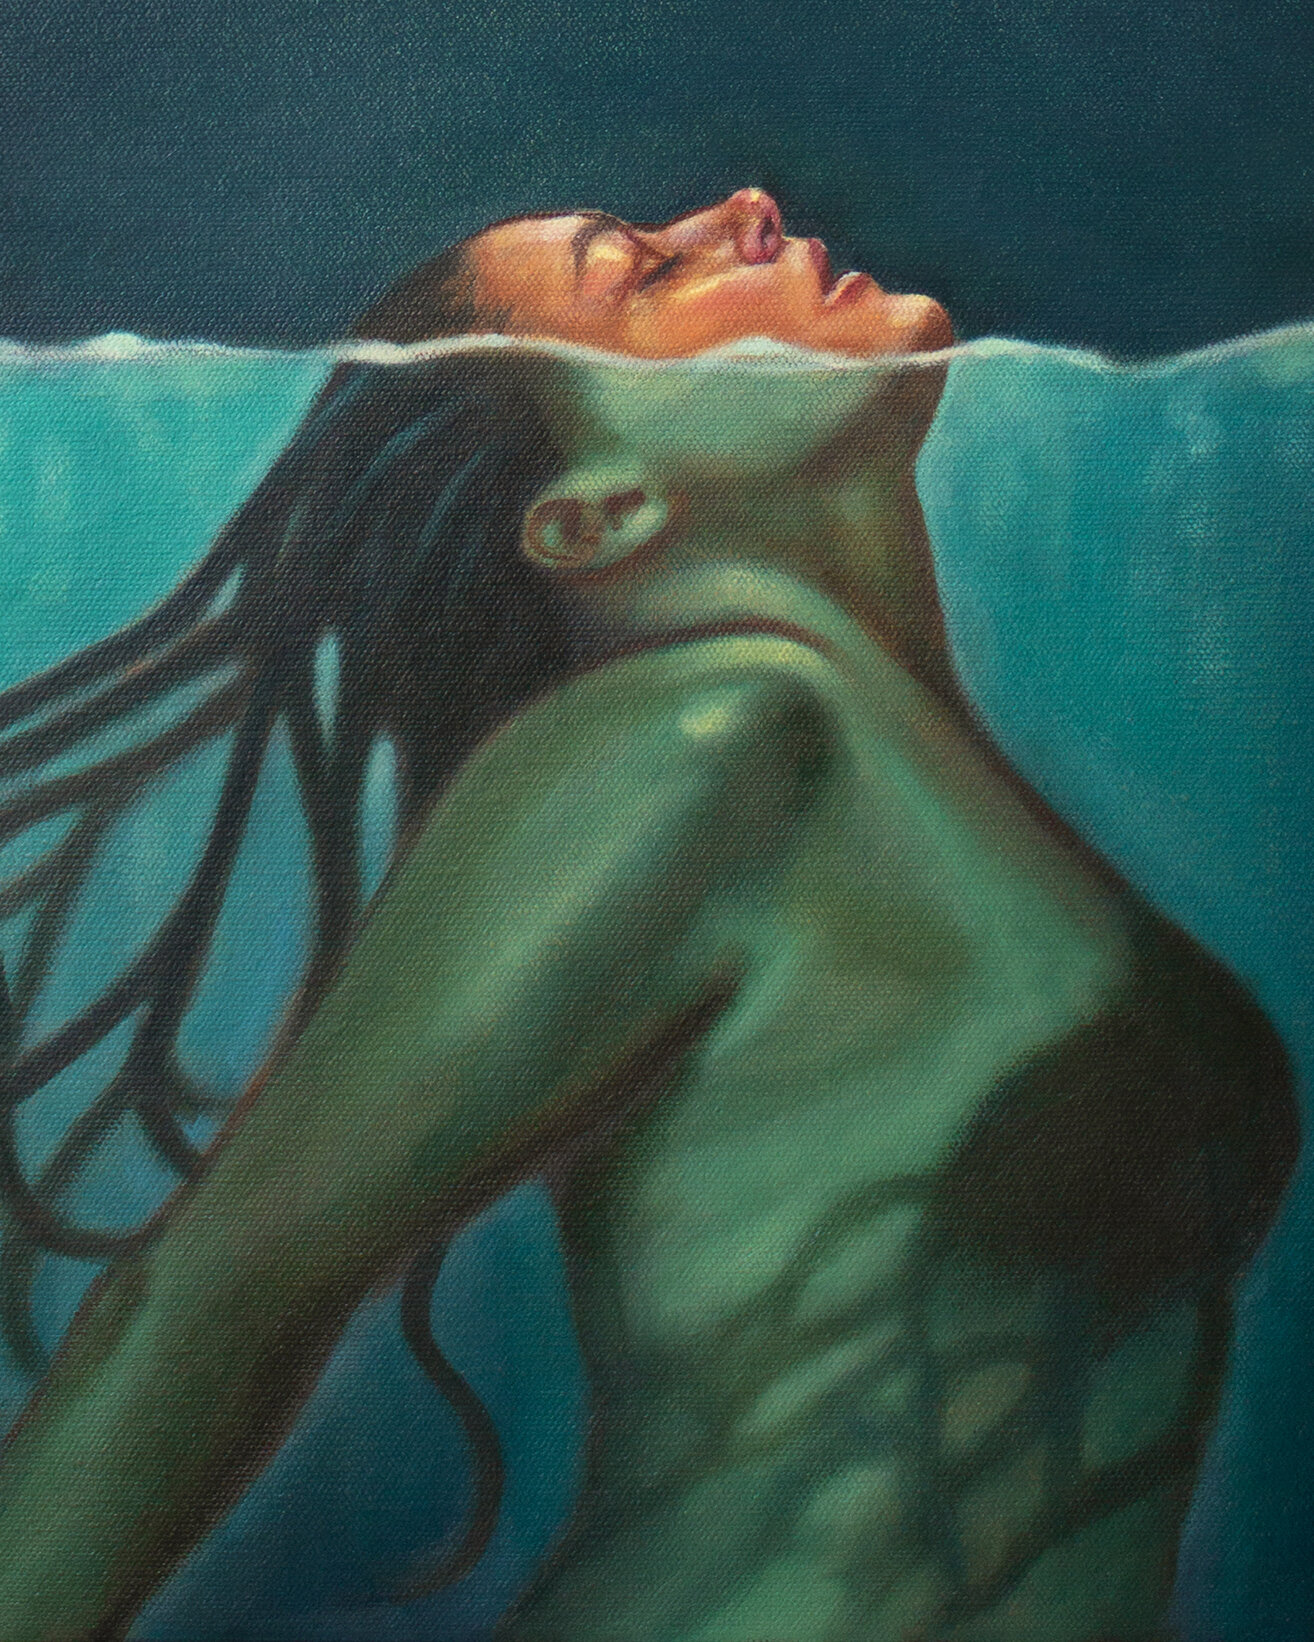 Painting myself as a sea creature is a return to my younger self &ndash; a girl who would channel her inner anguish into darkly-beautiful scenes of strange hybrid-like creatures. This work was created after the most recent of a series of life-changin